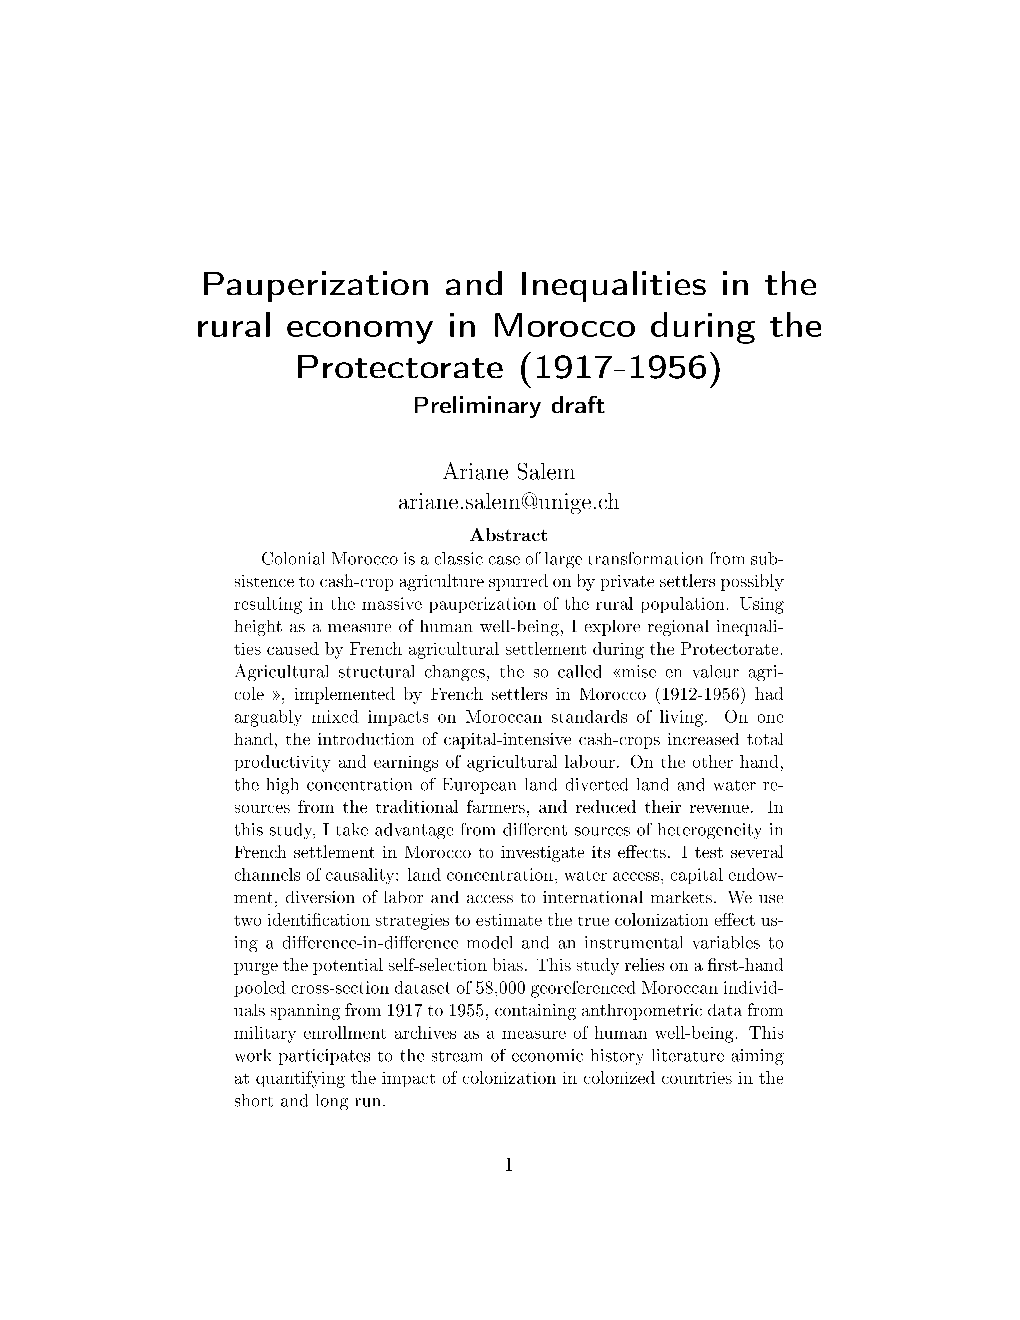 Pauperization and Inequalities in the Rural Economy in Morocco During the Protectorate (1917-1956) Preliminary Draft